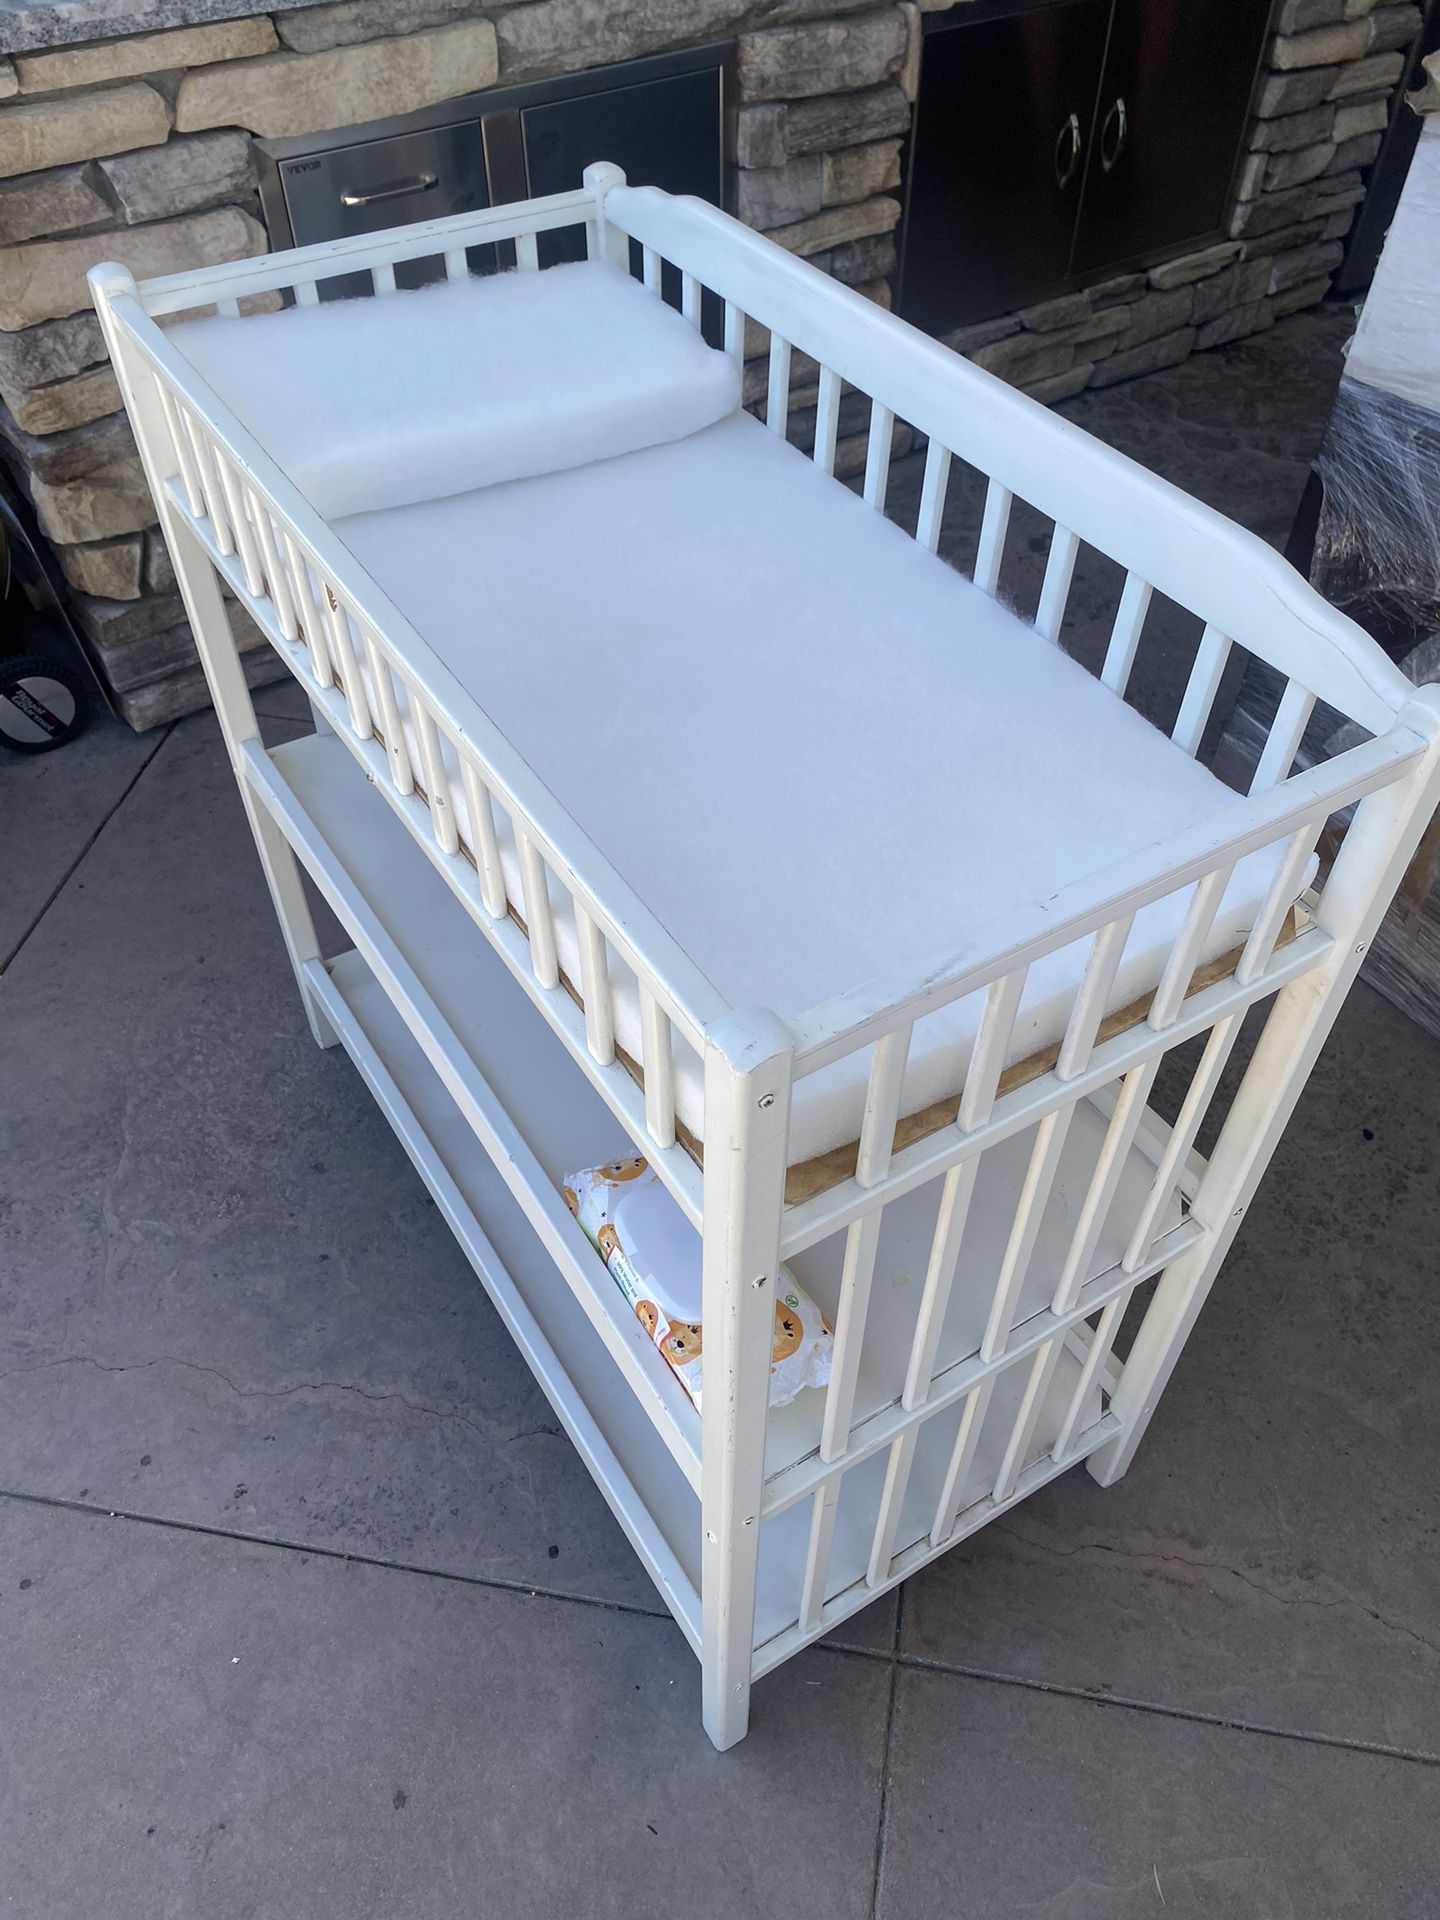 Infant Changing Table 